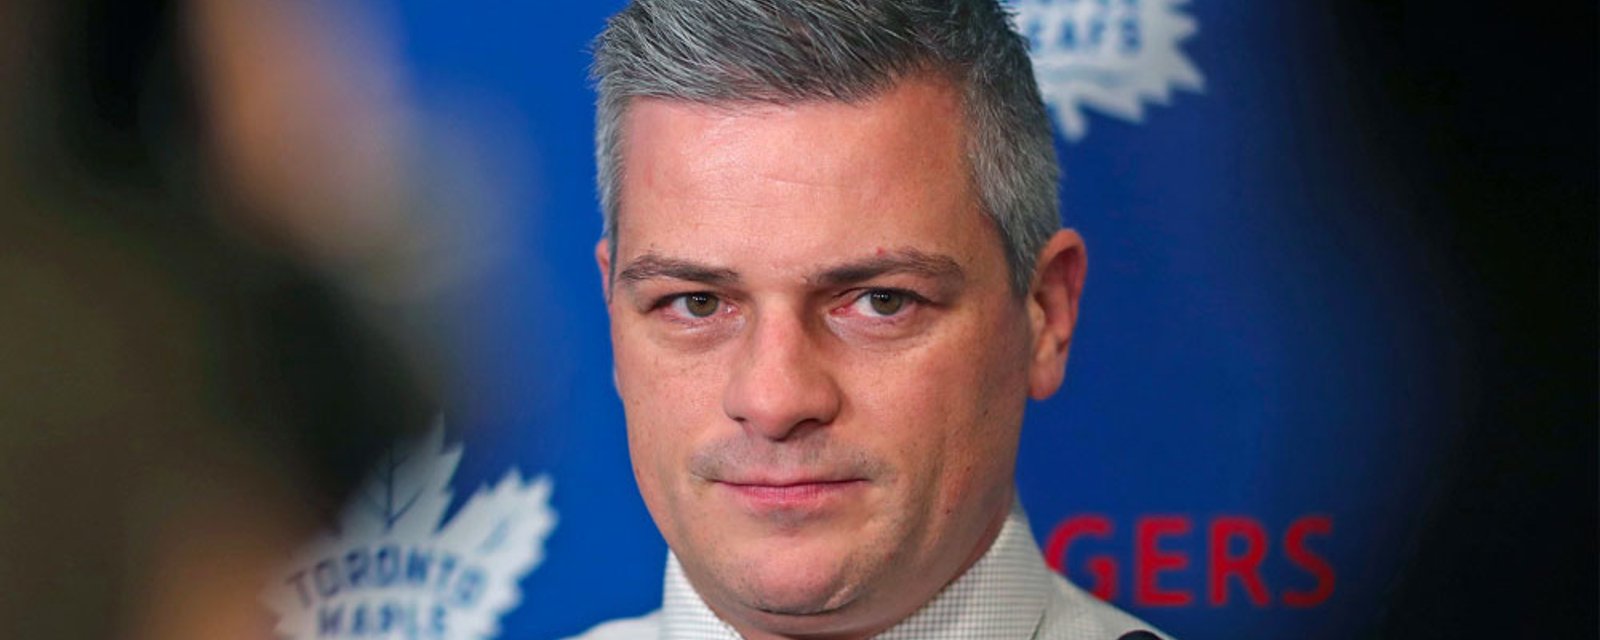 Leafs reportedly sign coach Sheldon Keefe to a contract extension